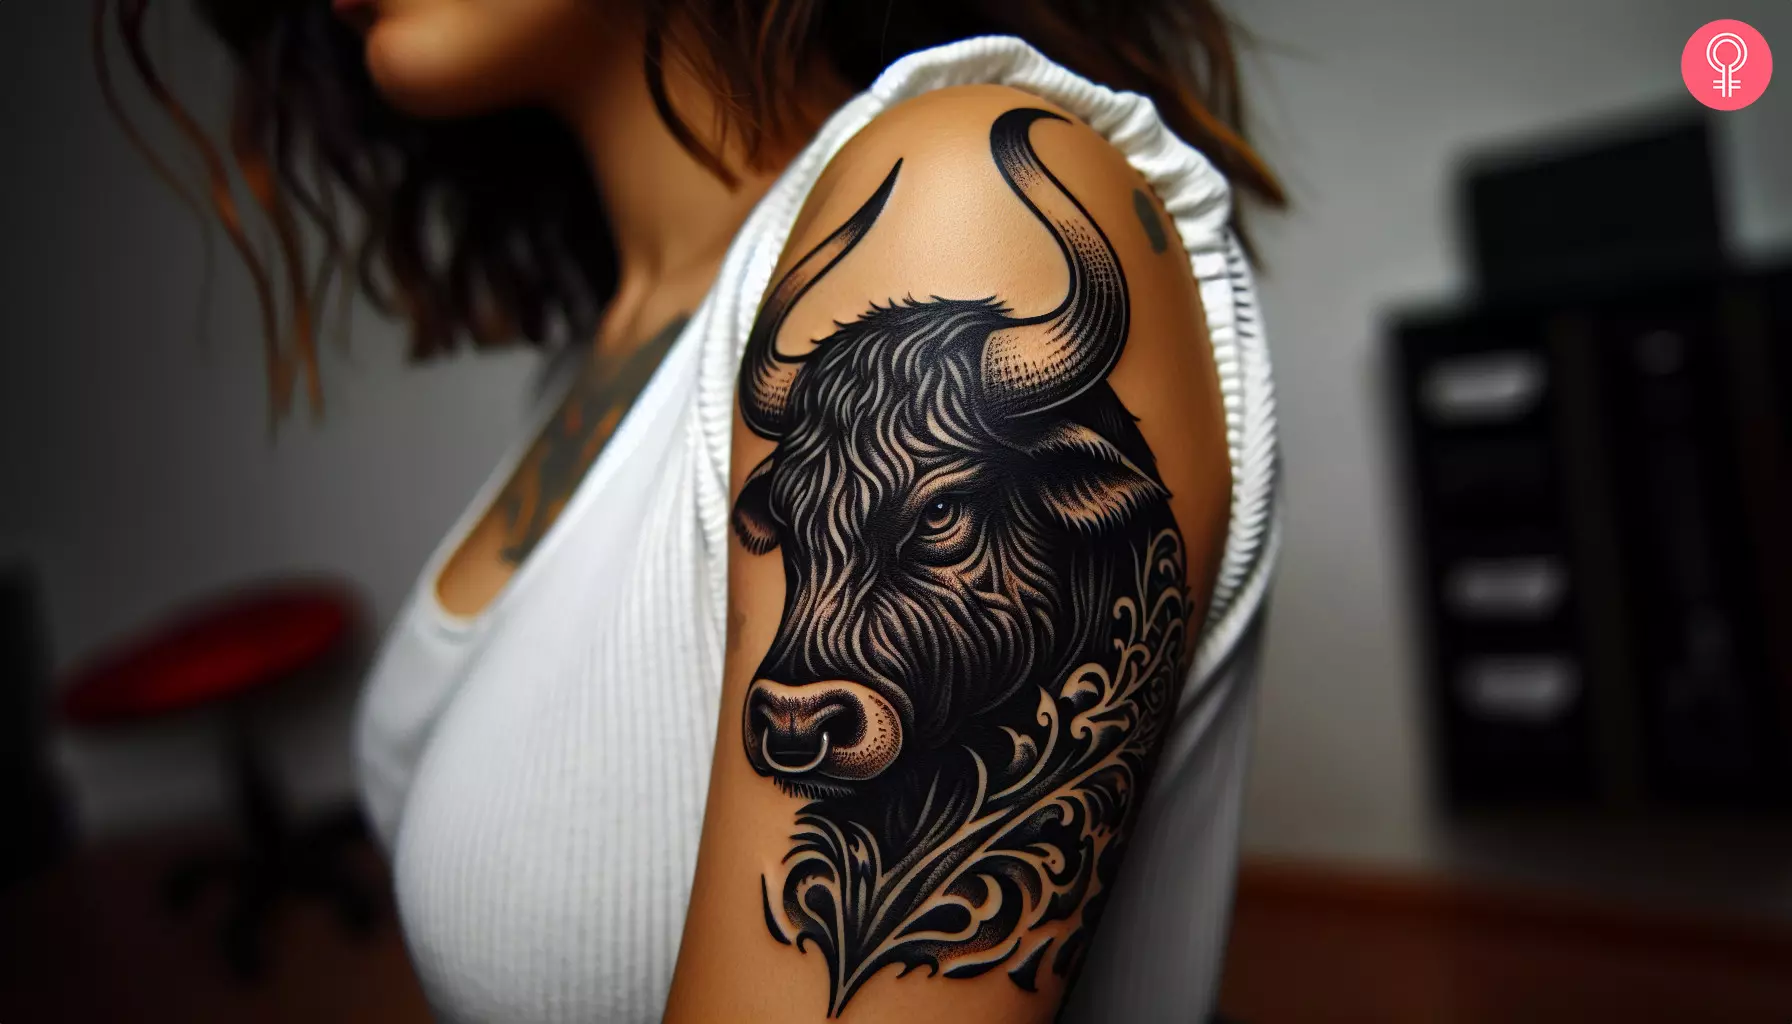 A traditional bull head tattoo on a woman’s upper arm